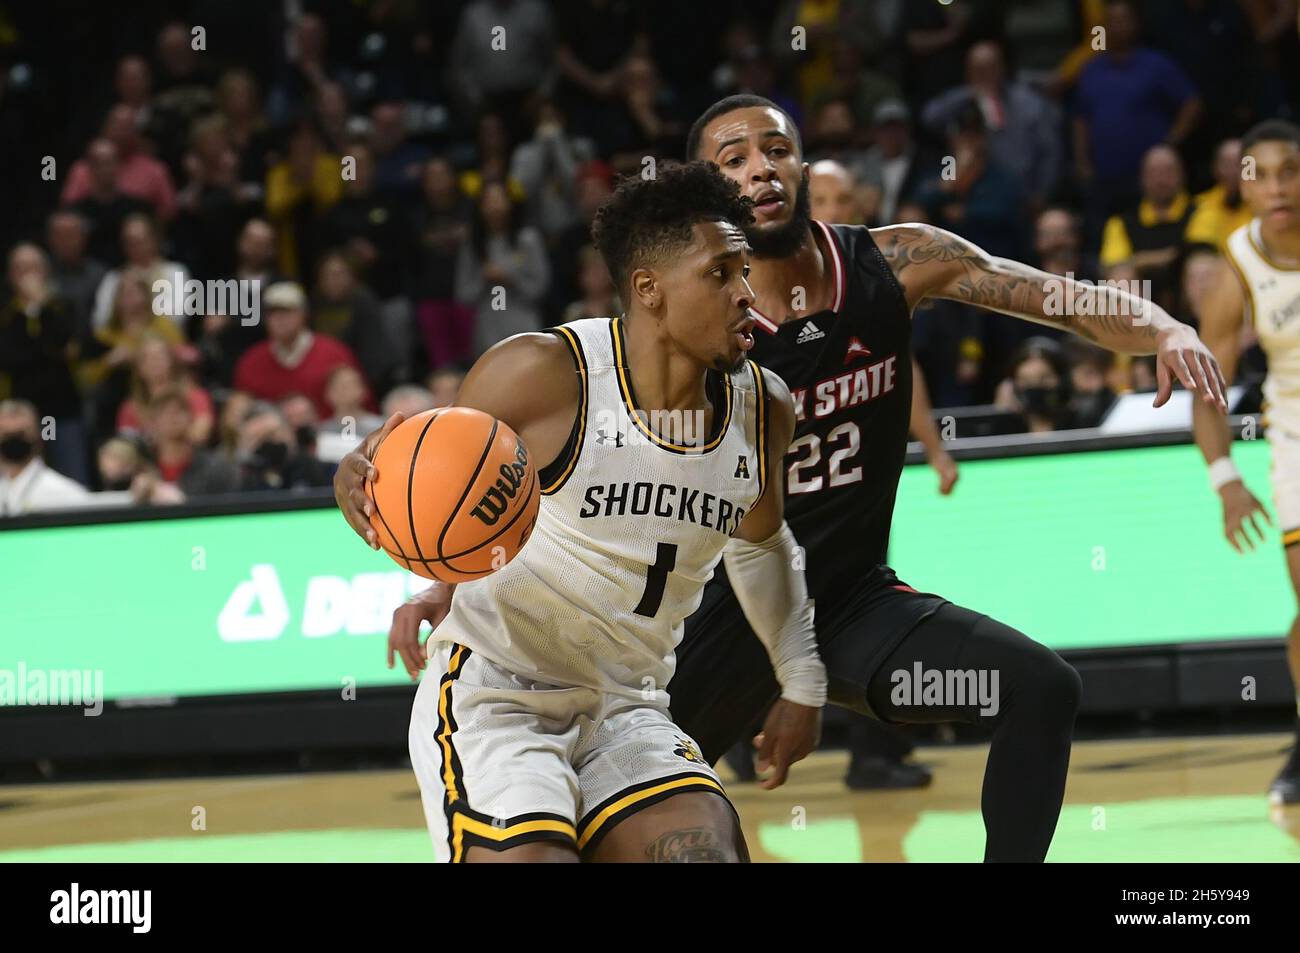 Wichita, Kansas, USA. 09th Nov, 2021. Wichita State Shockers guard Tyson Etienne (1) drives to the basket during the NCAA Basketball Game between the Jacksonville State Gamecocks and the Wichita State Shockers at Charles Koch Arena in Wichita, Kansas. Kendall Shaw/CSM/Alamy Live News Stock Photo